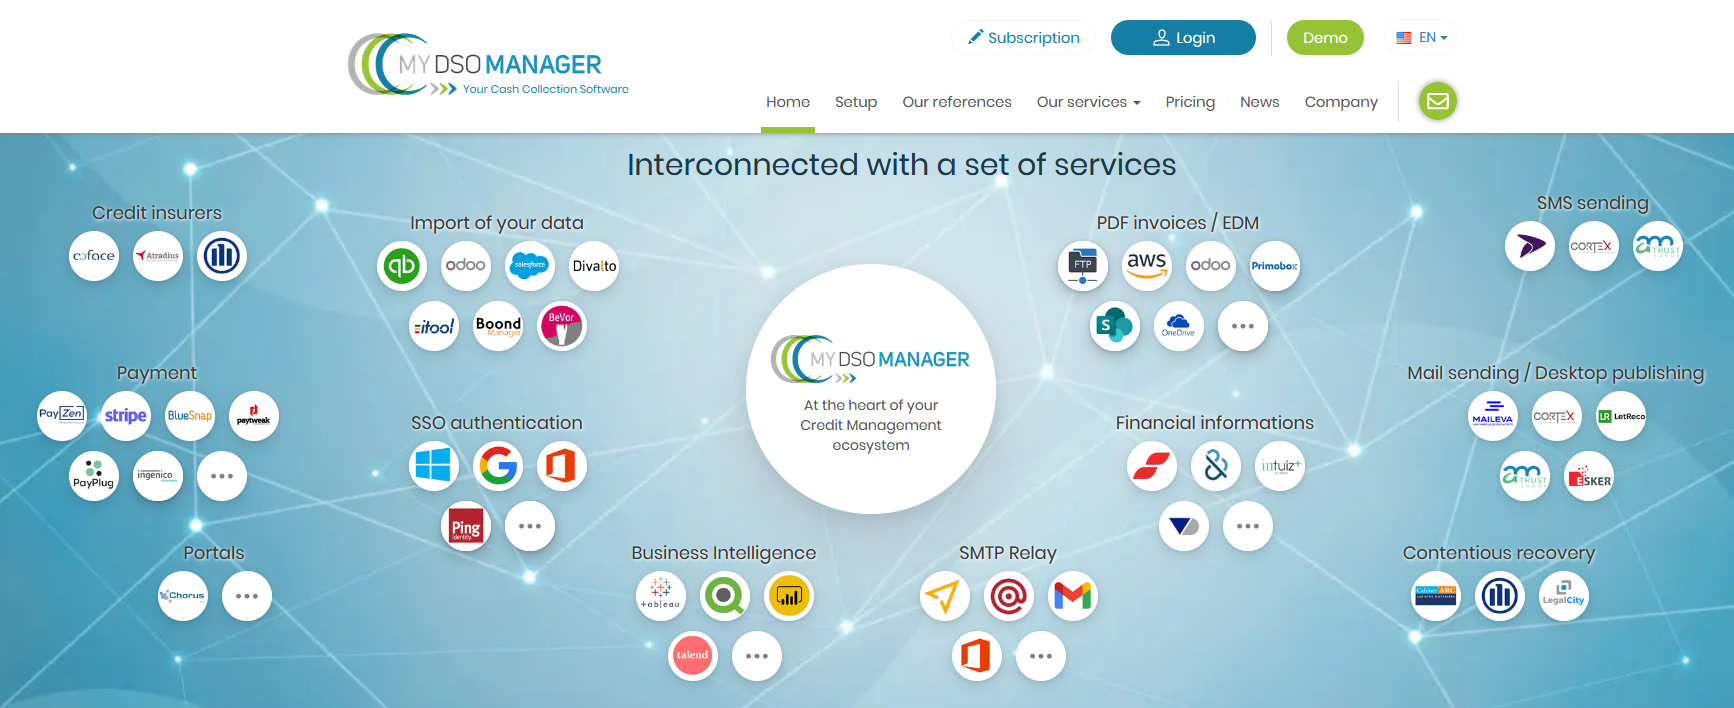 My DSO Manager at the heart of your Credit Management ecosystem : interconnected with a set of services